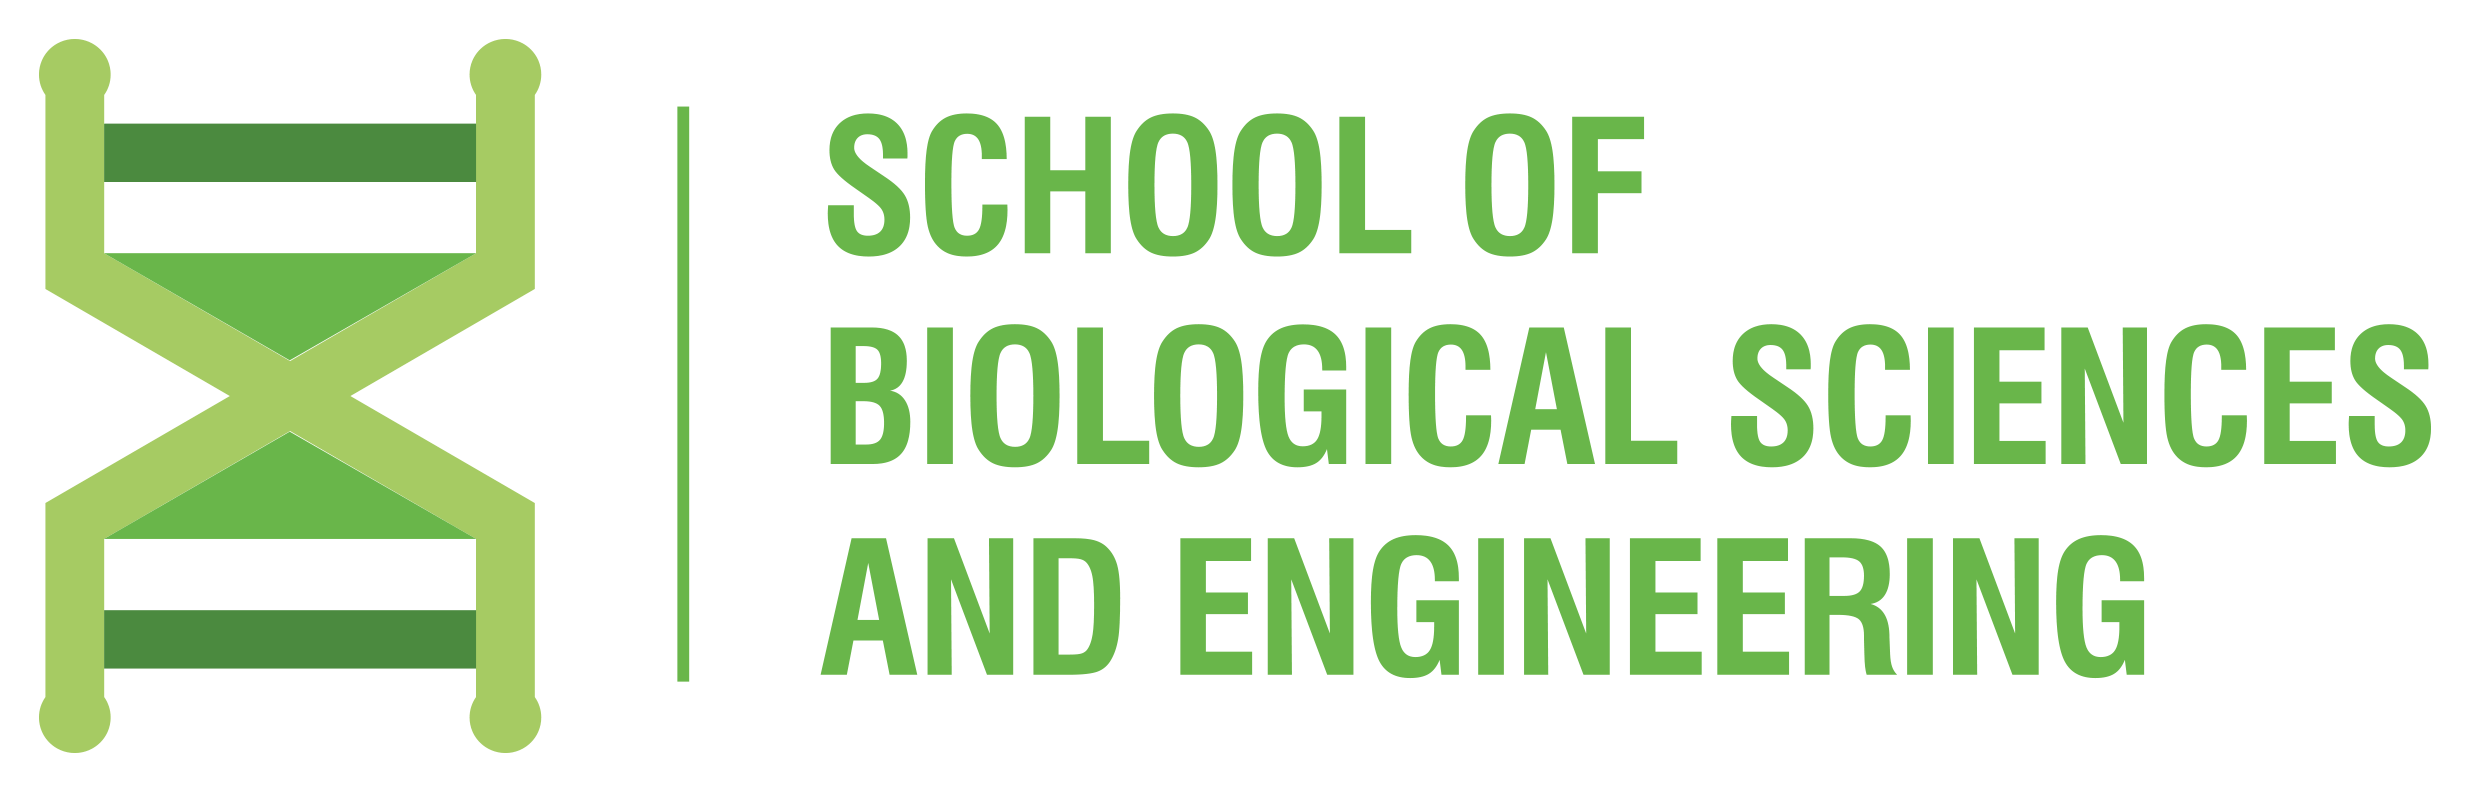 Biological Sciences and Engineering